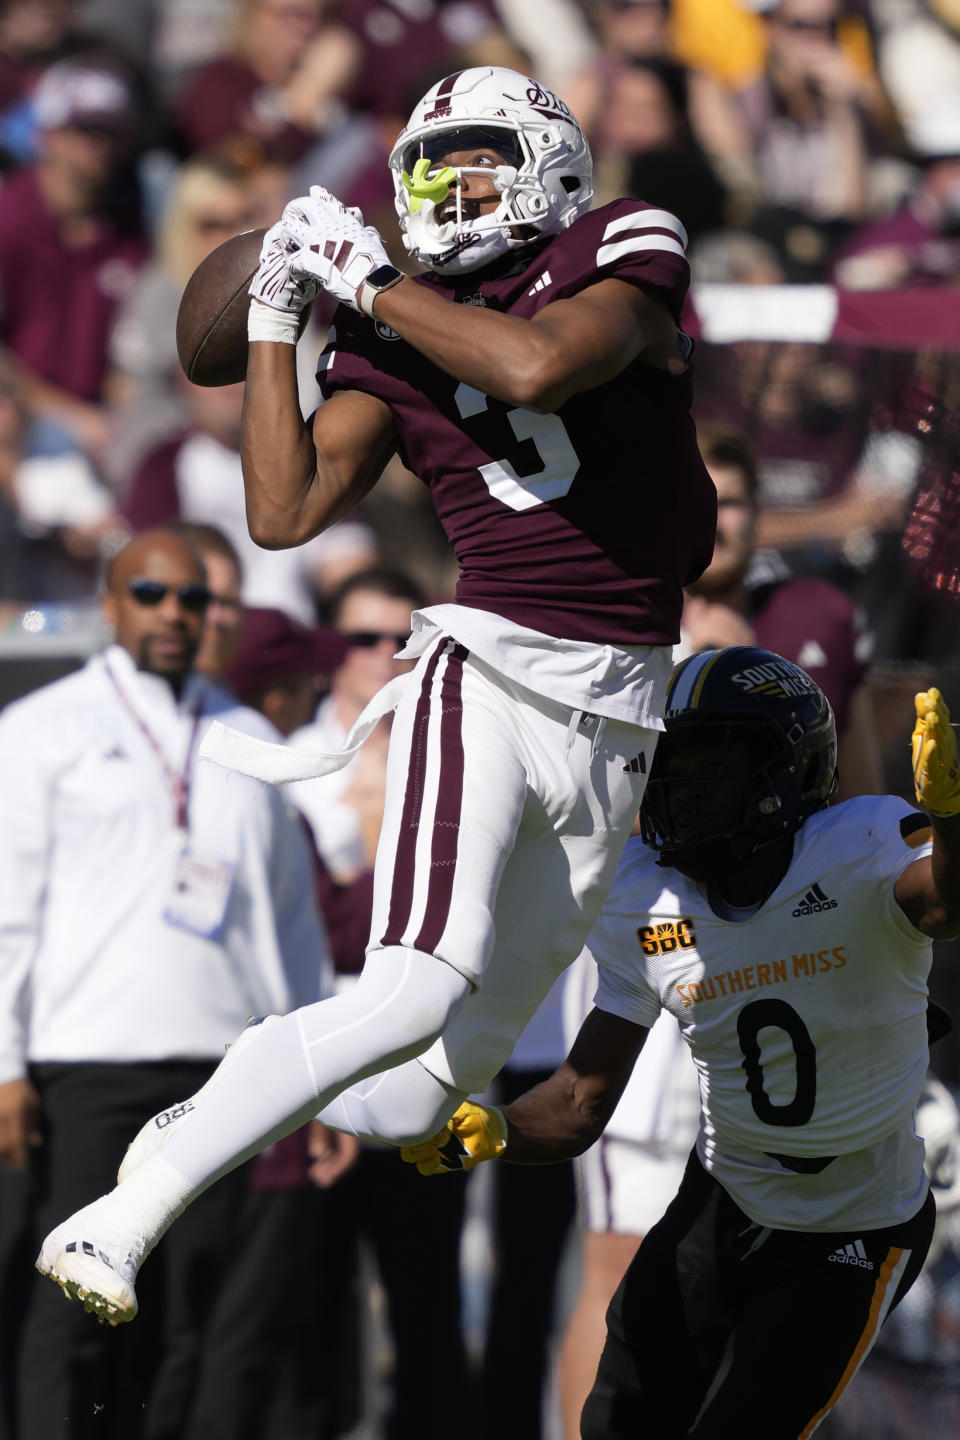 Mississippi State wide receiver Justin Robinson (3) cannot hold on to a pass as Southern Mississippi cornerback Brendan Toles (0) defends during the first half of an NCAA college football game in Starkville, Miss., Saturday, Nov. 18, 2023. (AP Photo/Rogelio V. Solis)